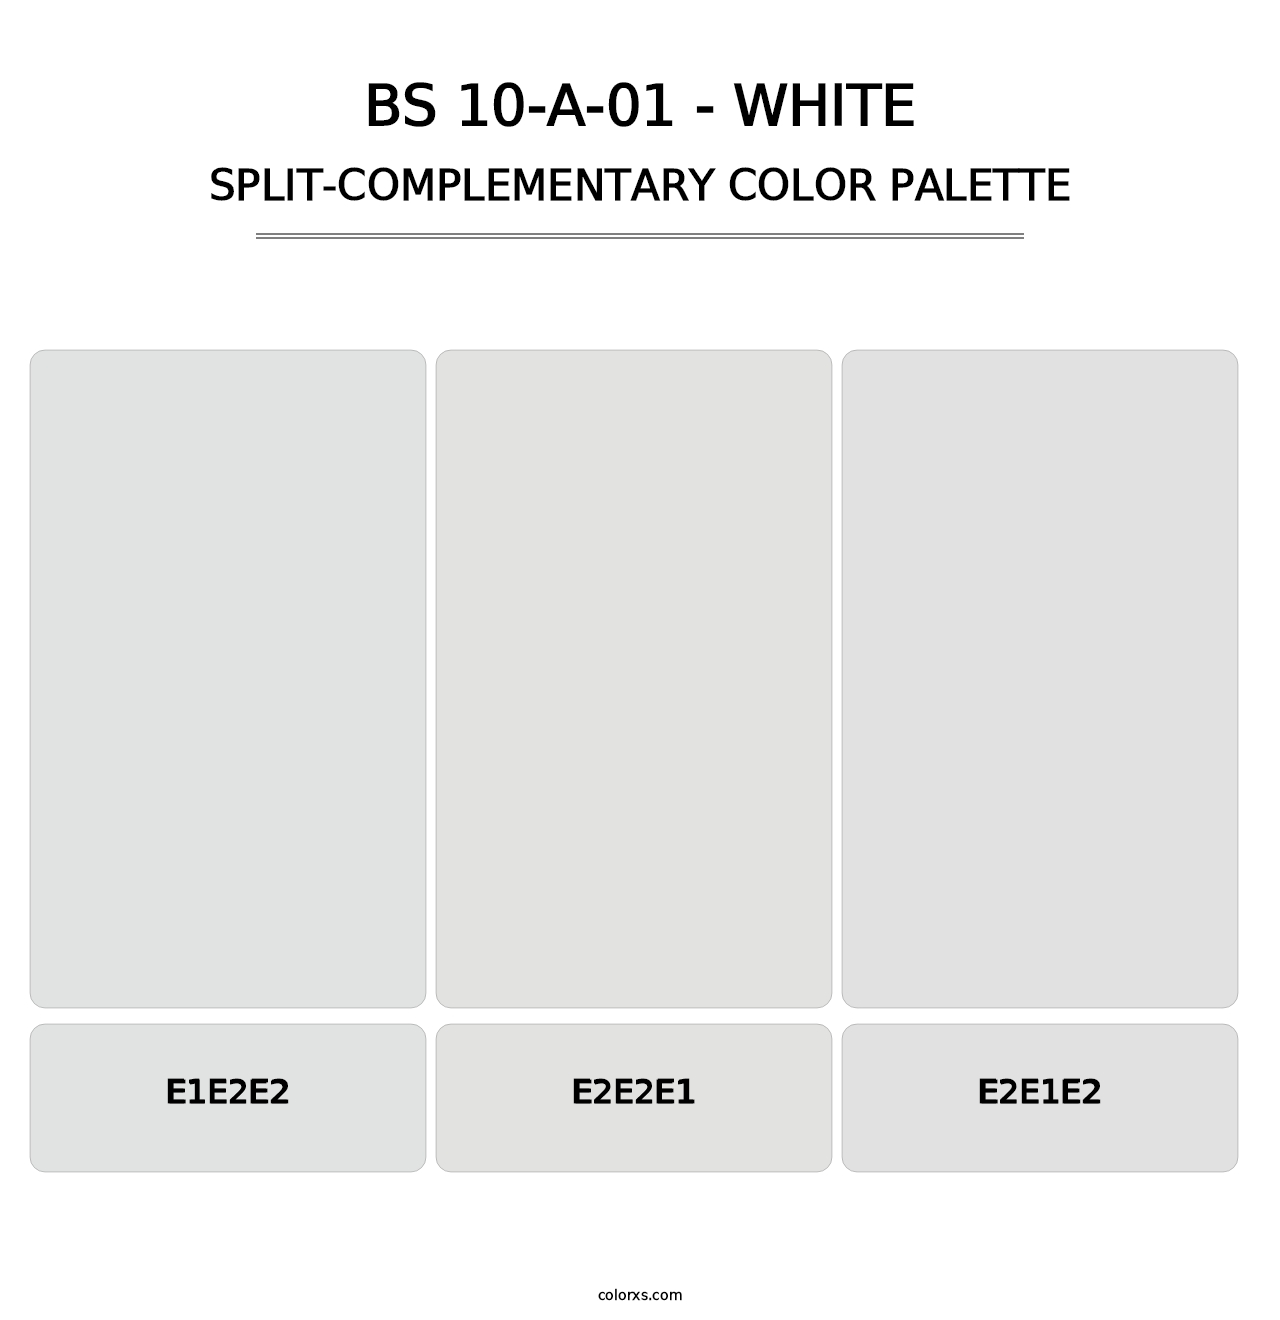 BS 10-A-01 - White - Split-Complementary Color Palette